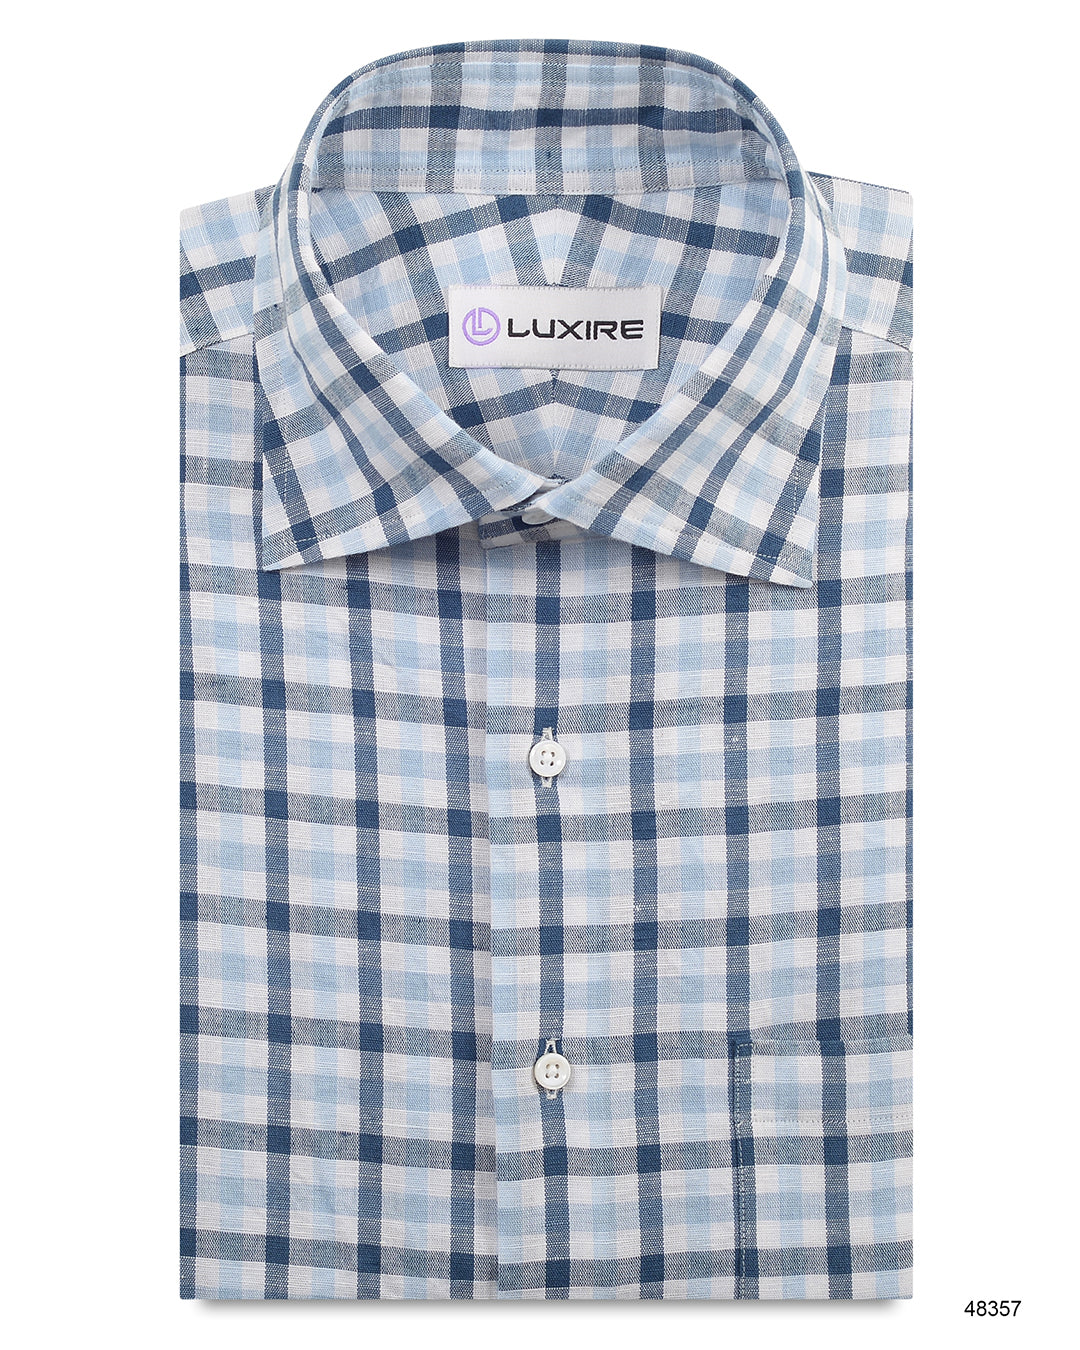 Front of the custom linen shirt for men in shades of blue checks by Luxire Clothing